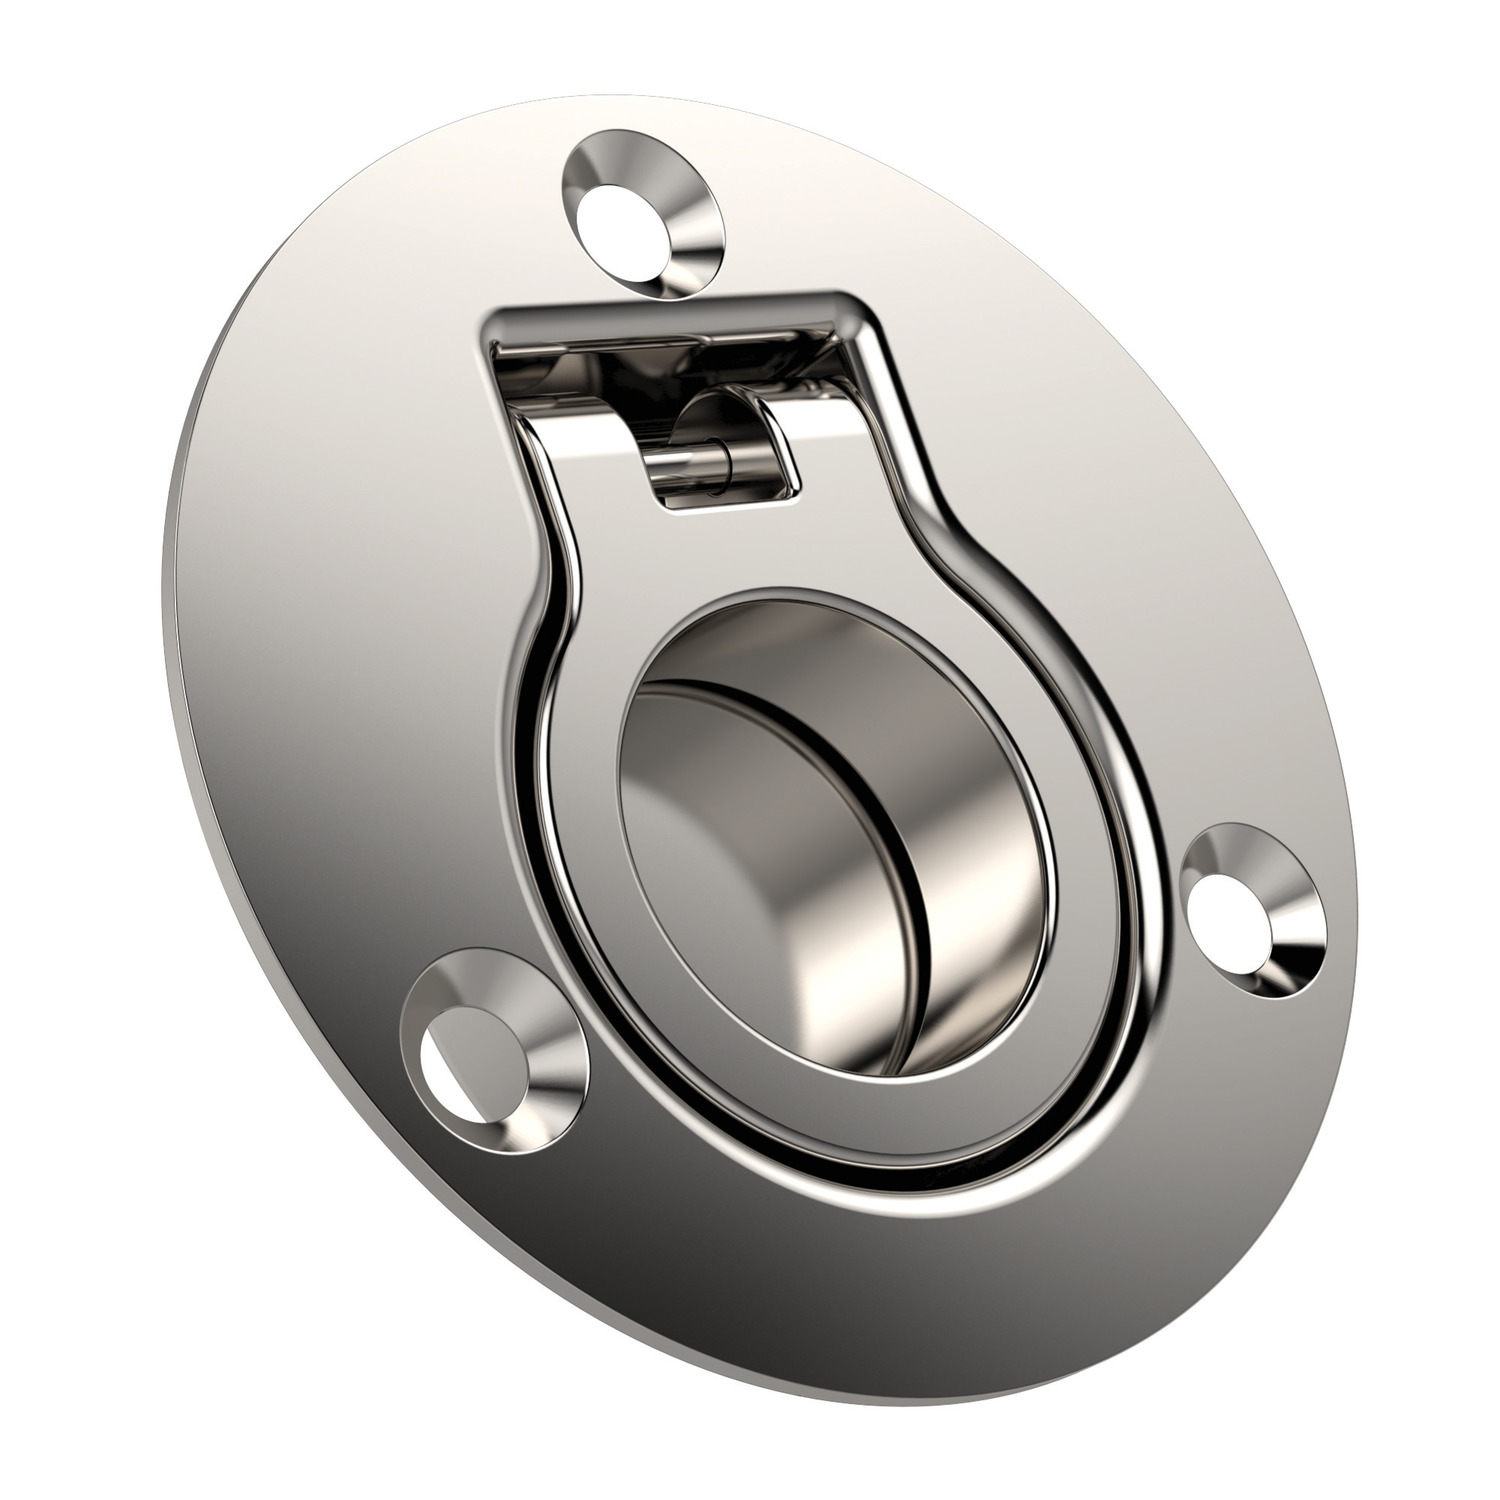 Product 79730, Ring Pulls, Recessed stainless steel / 